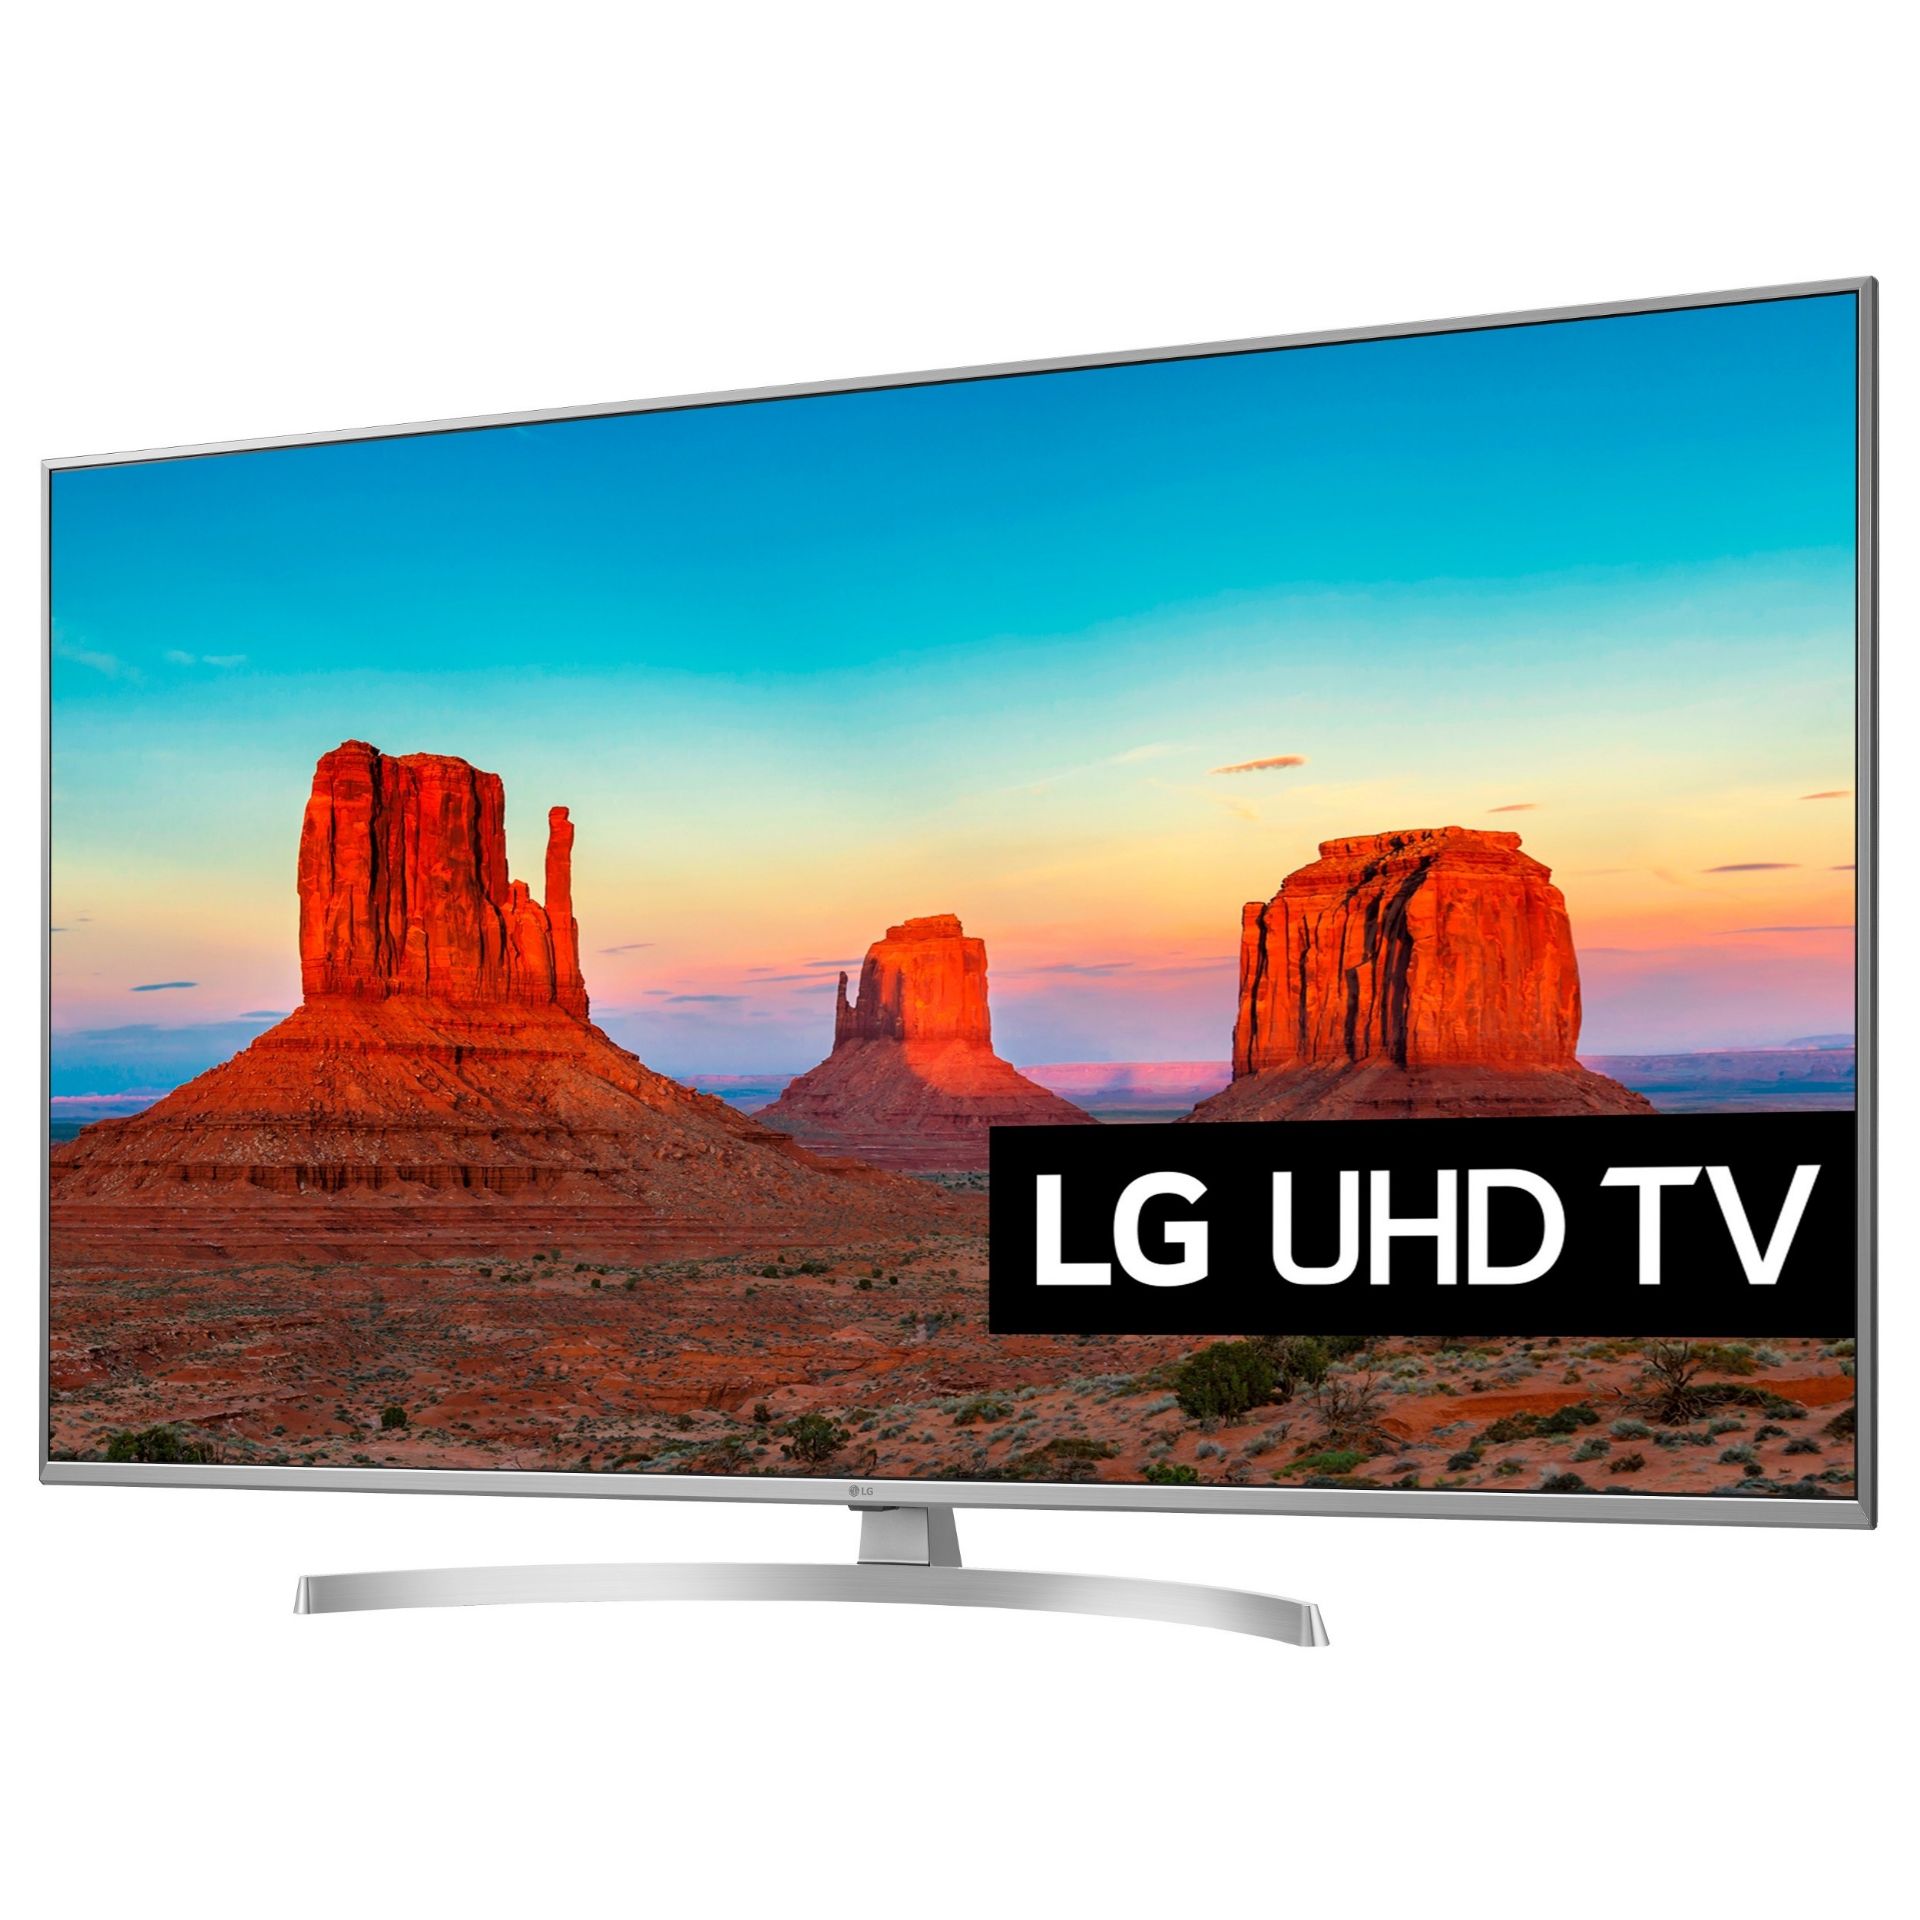 V Grade A LG 55 Inch ACTIVE HDR 4K ULTRA HD NANO LED SMART TV WITH FREEVIEW HD & WEBOS 4.0 &